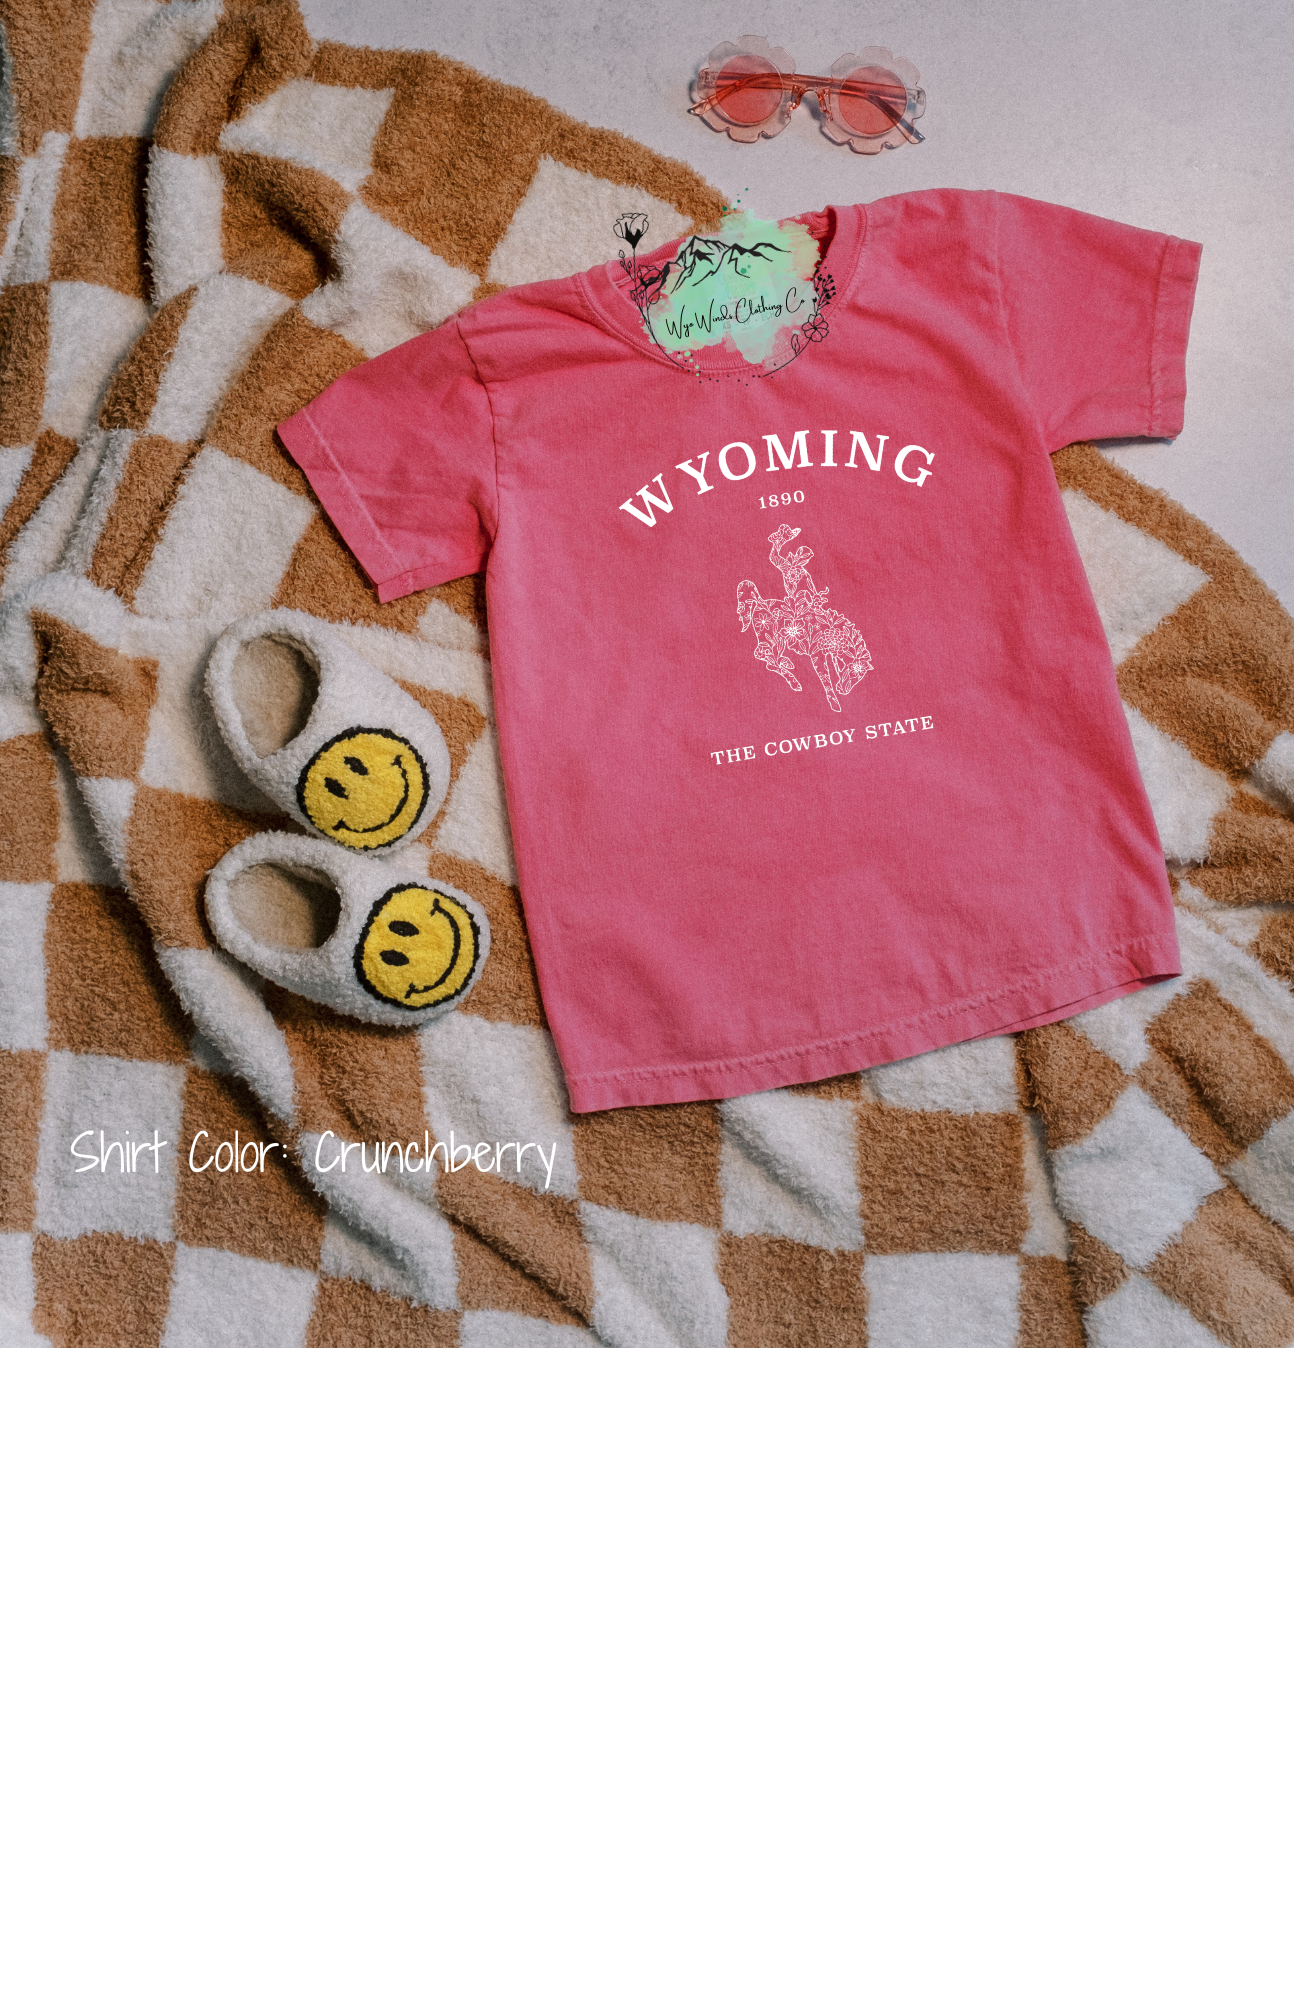 Youth Floral 1890 Steamboat Wyoming tee